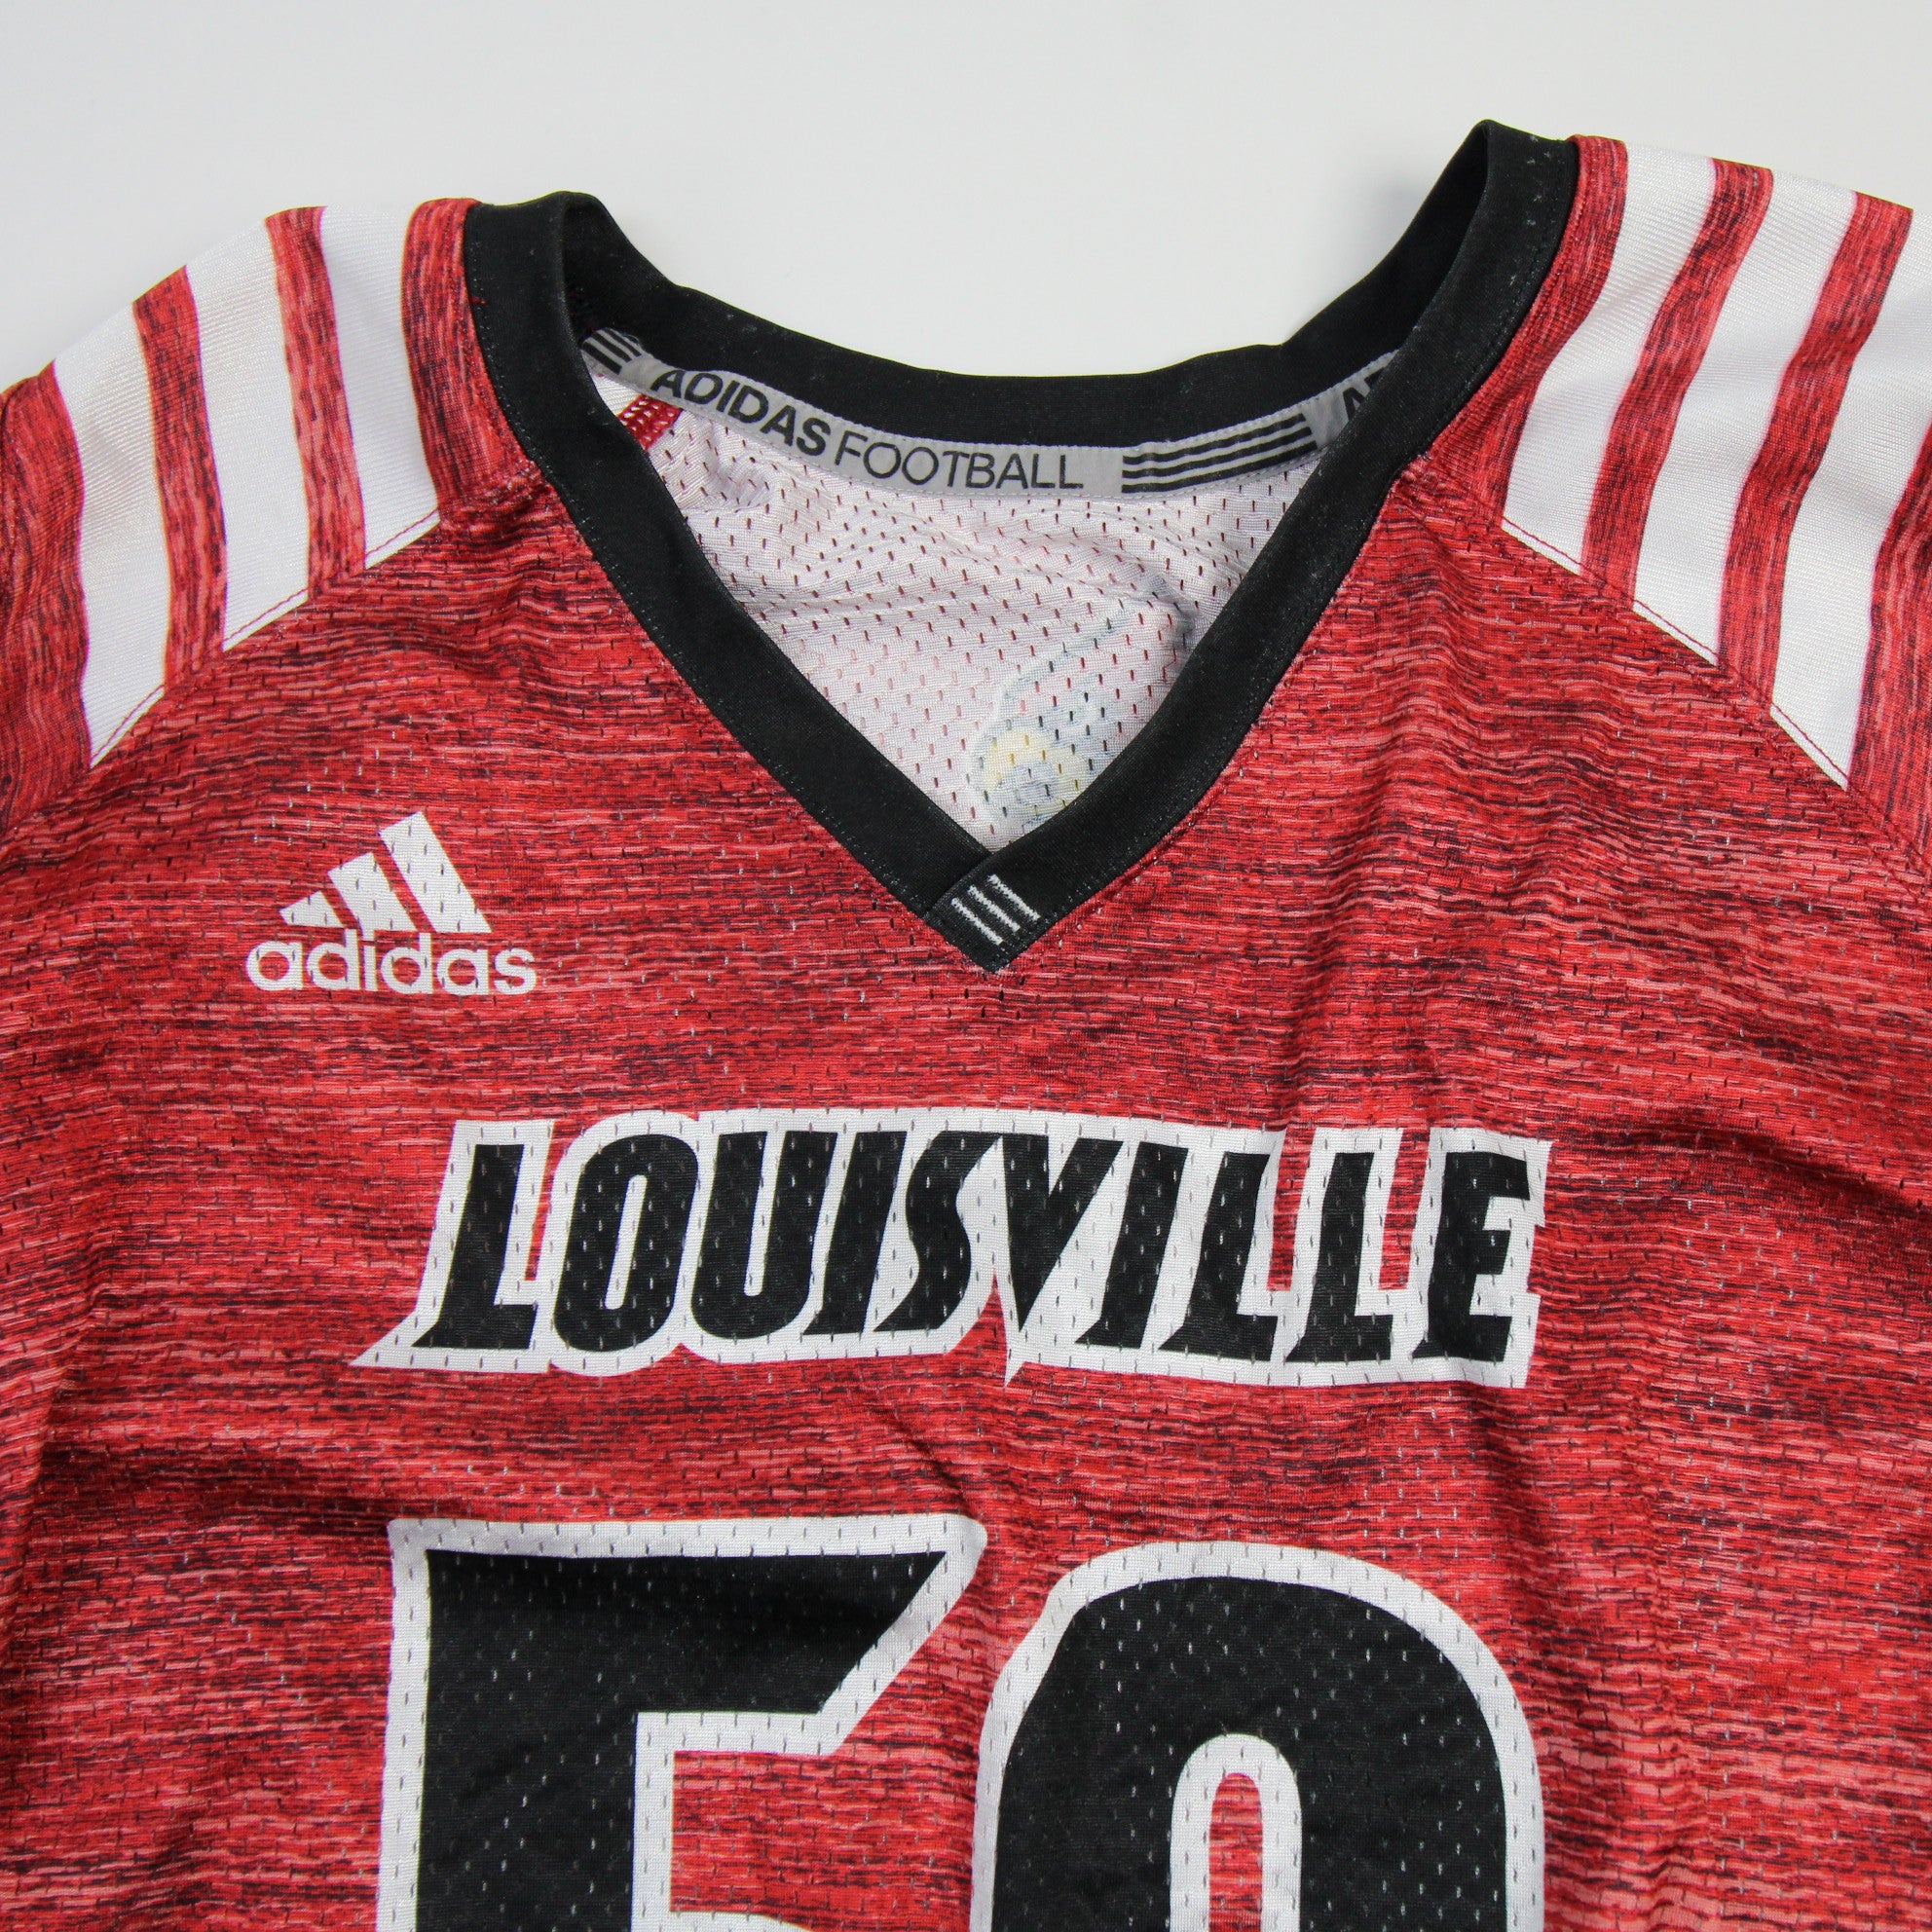 Louisville Cardinals adidas Practice Jersey - Football Men's White/Red New  L | SidelineSwap